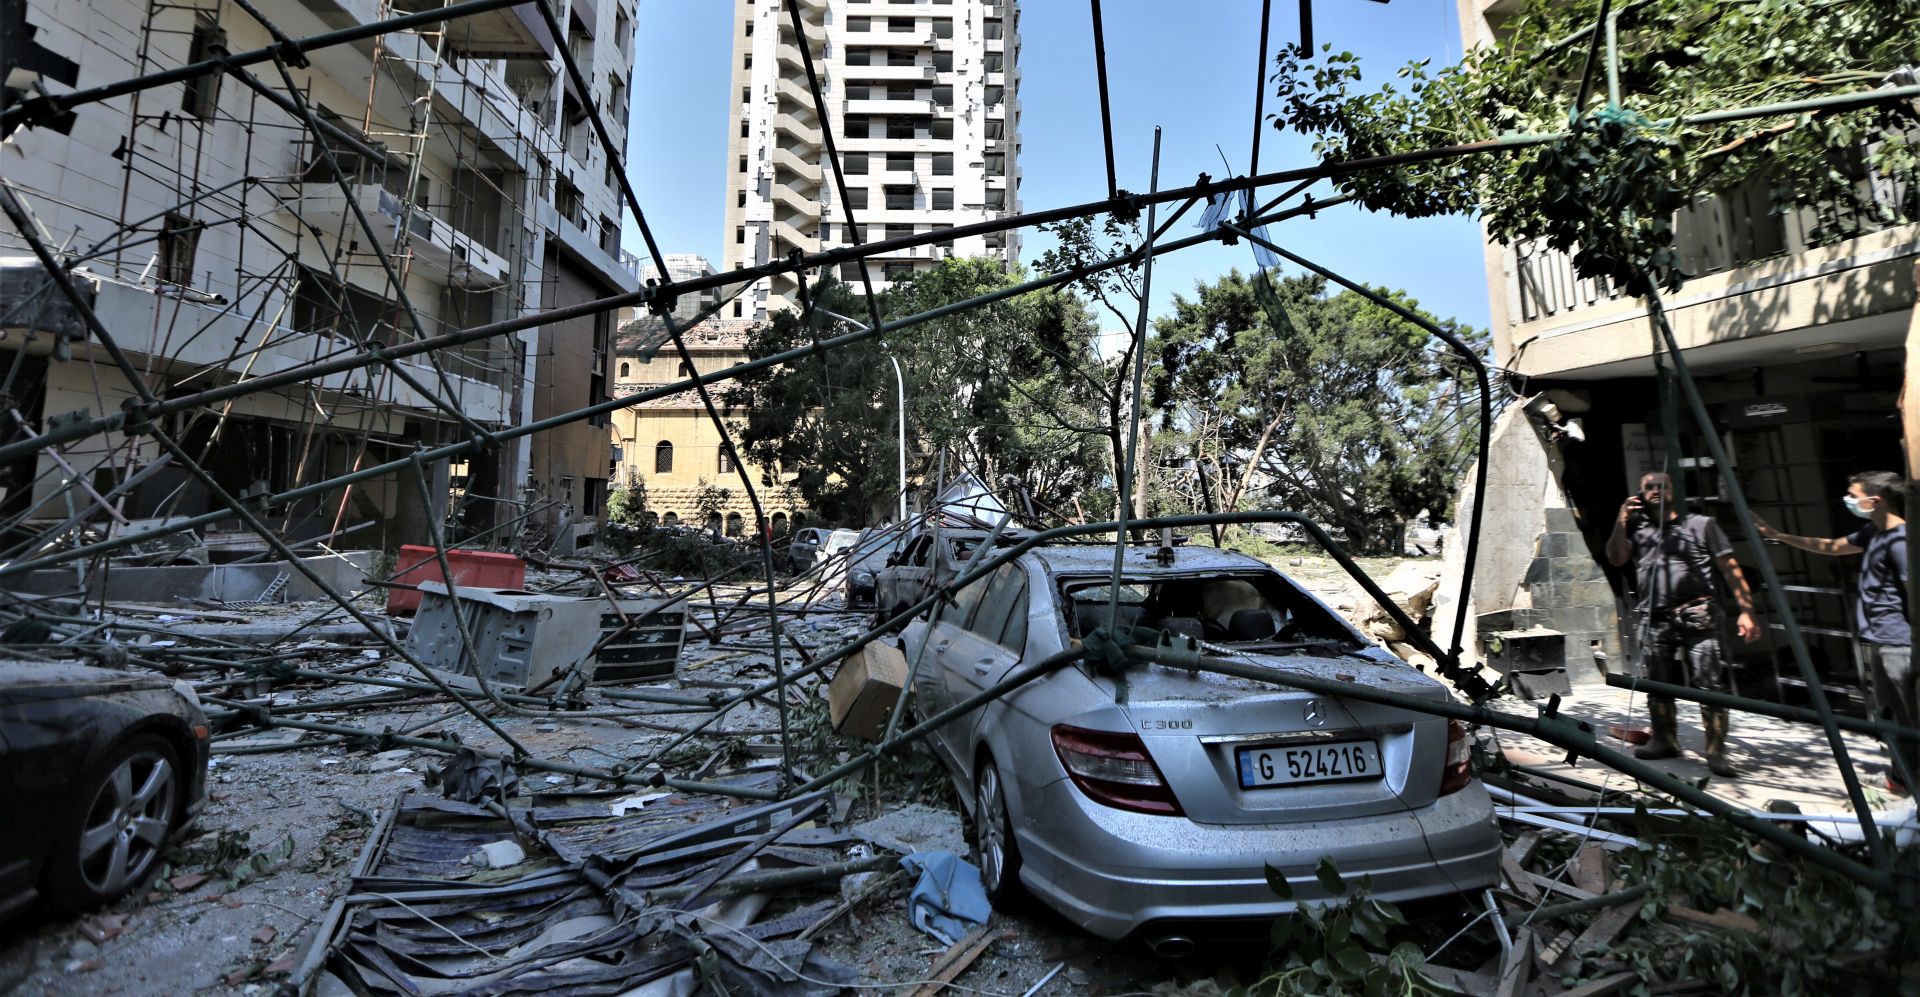 epa08585520 A view of damaged buildings after massive explosion in Beirut, Lebanon, 05 August 2020. According to Beirut's Governor Marwan Abboud, at least 100 people were killed and more than 4,000 were injured after an explosion, caused by over 2,500 tons of ammonium nitrate stored in a warehouse, devastated the port area on 04 August.  EPA/NABIL MOUNZER